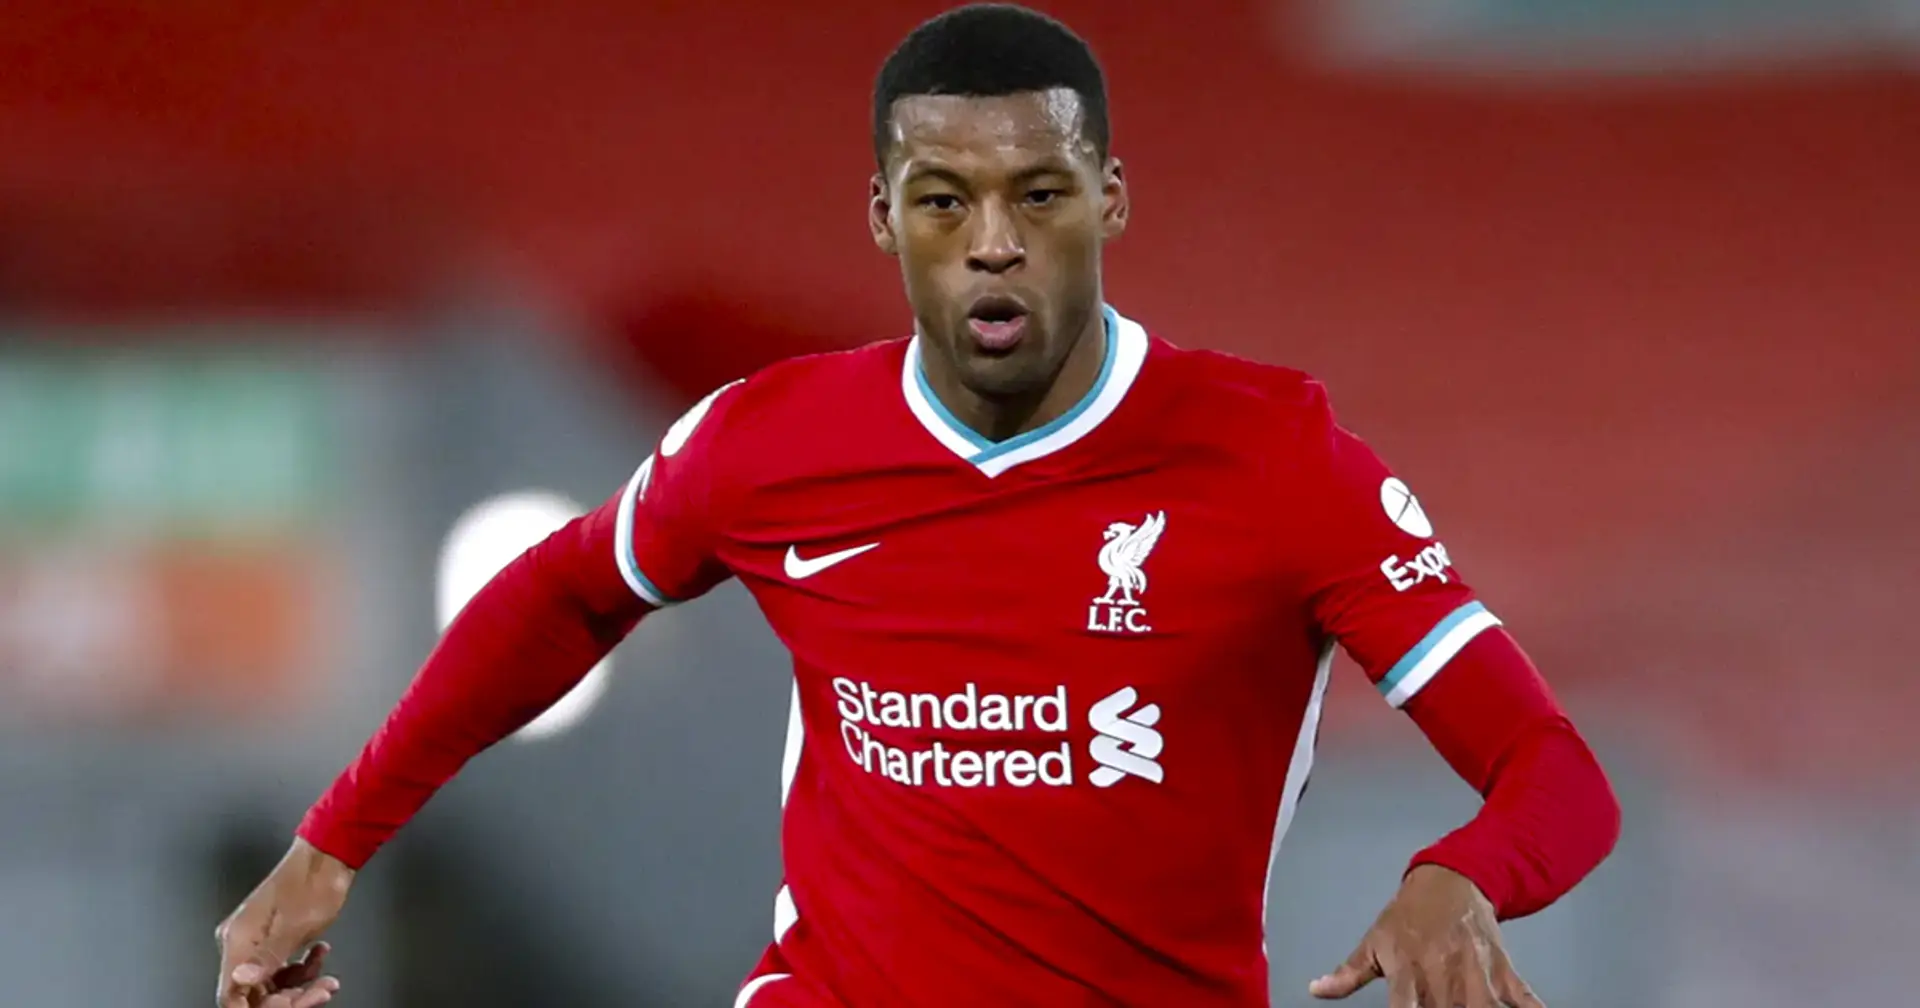 Wijnaldum agrees pre-contract deal with Barca, set to join for free (reliability: 4 stars)